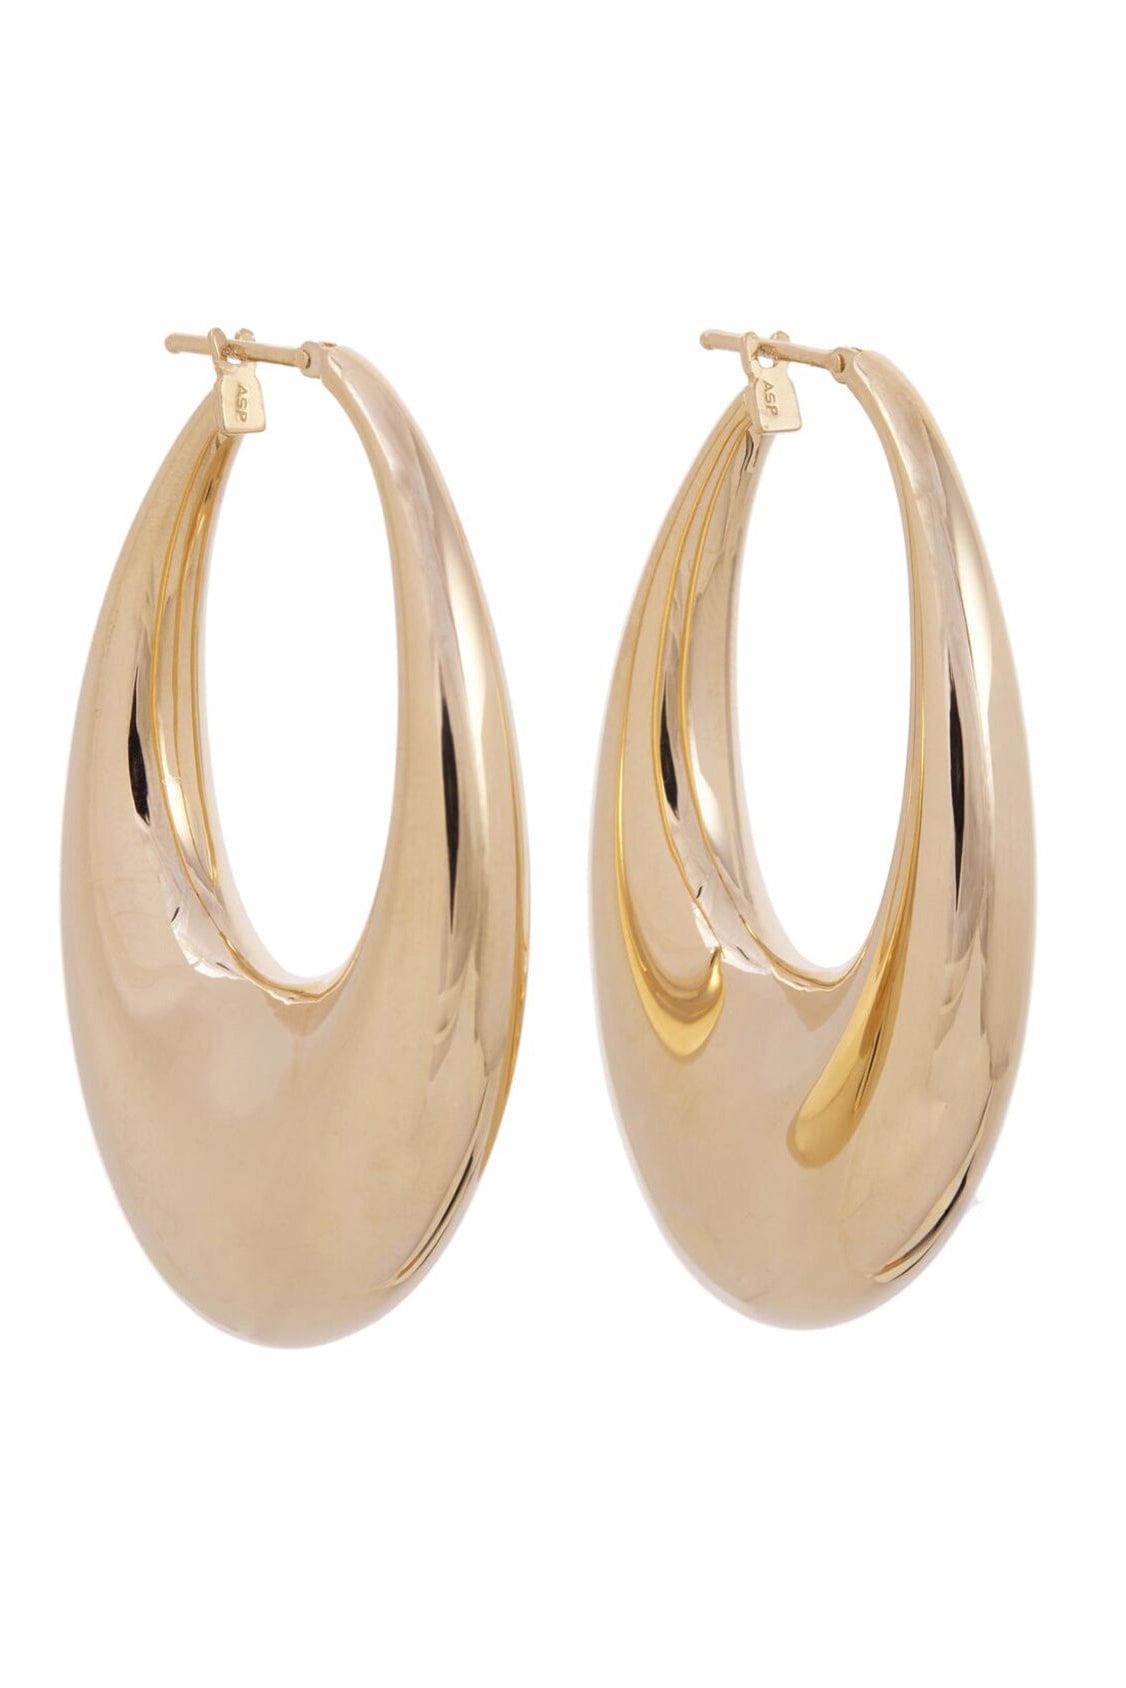 SIDNEY GARBER-Carine Earrings - Yellow Gold-YELLOW GOLD